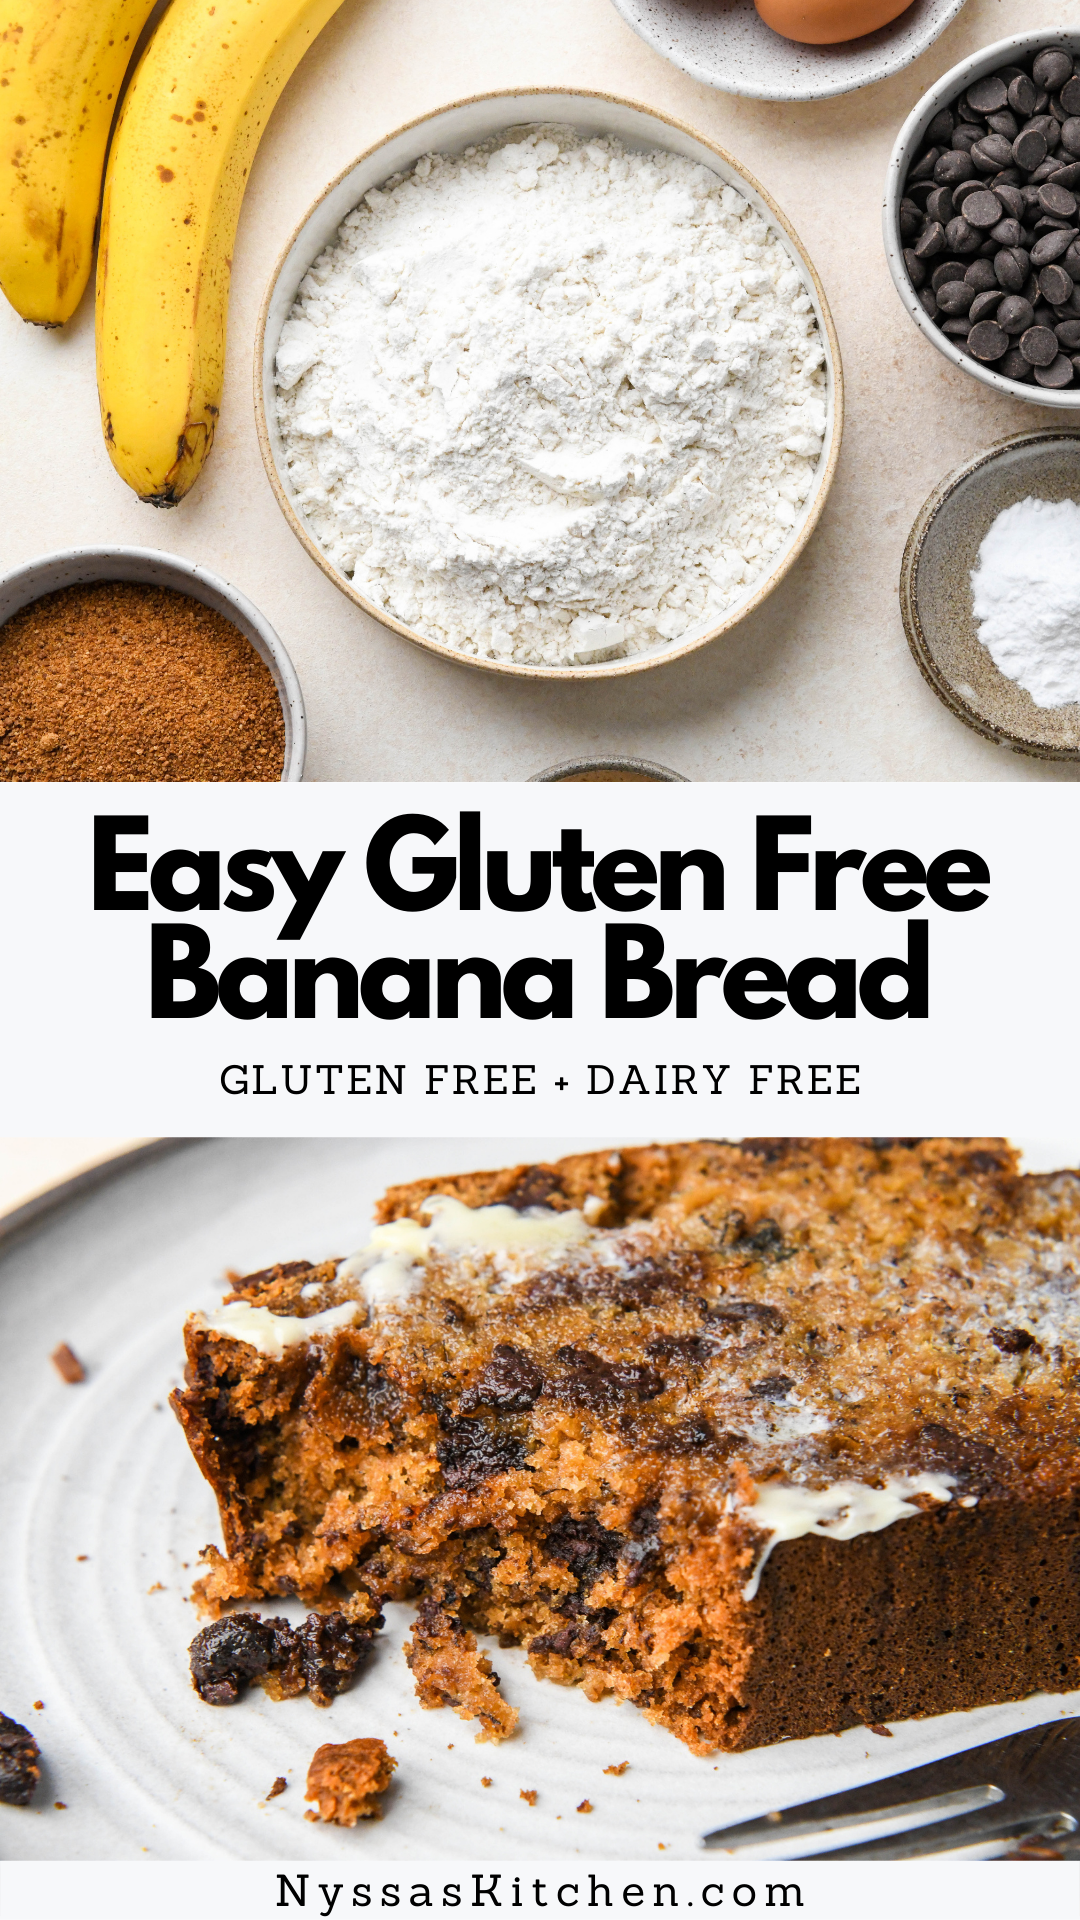 This easy gluten free banana bread is moist, healthy, and just as delicious as regular banana bread! Made with simple, clean ingredients, chocolate chips, and all purpose gluten free flour for a recipe you'll come back to again and again. Perfect for breakfast or a mid day snack! Gluten free, dairy free, and naturally sweetened.